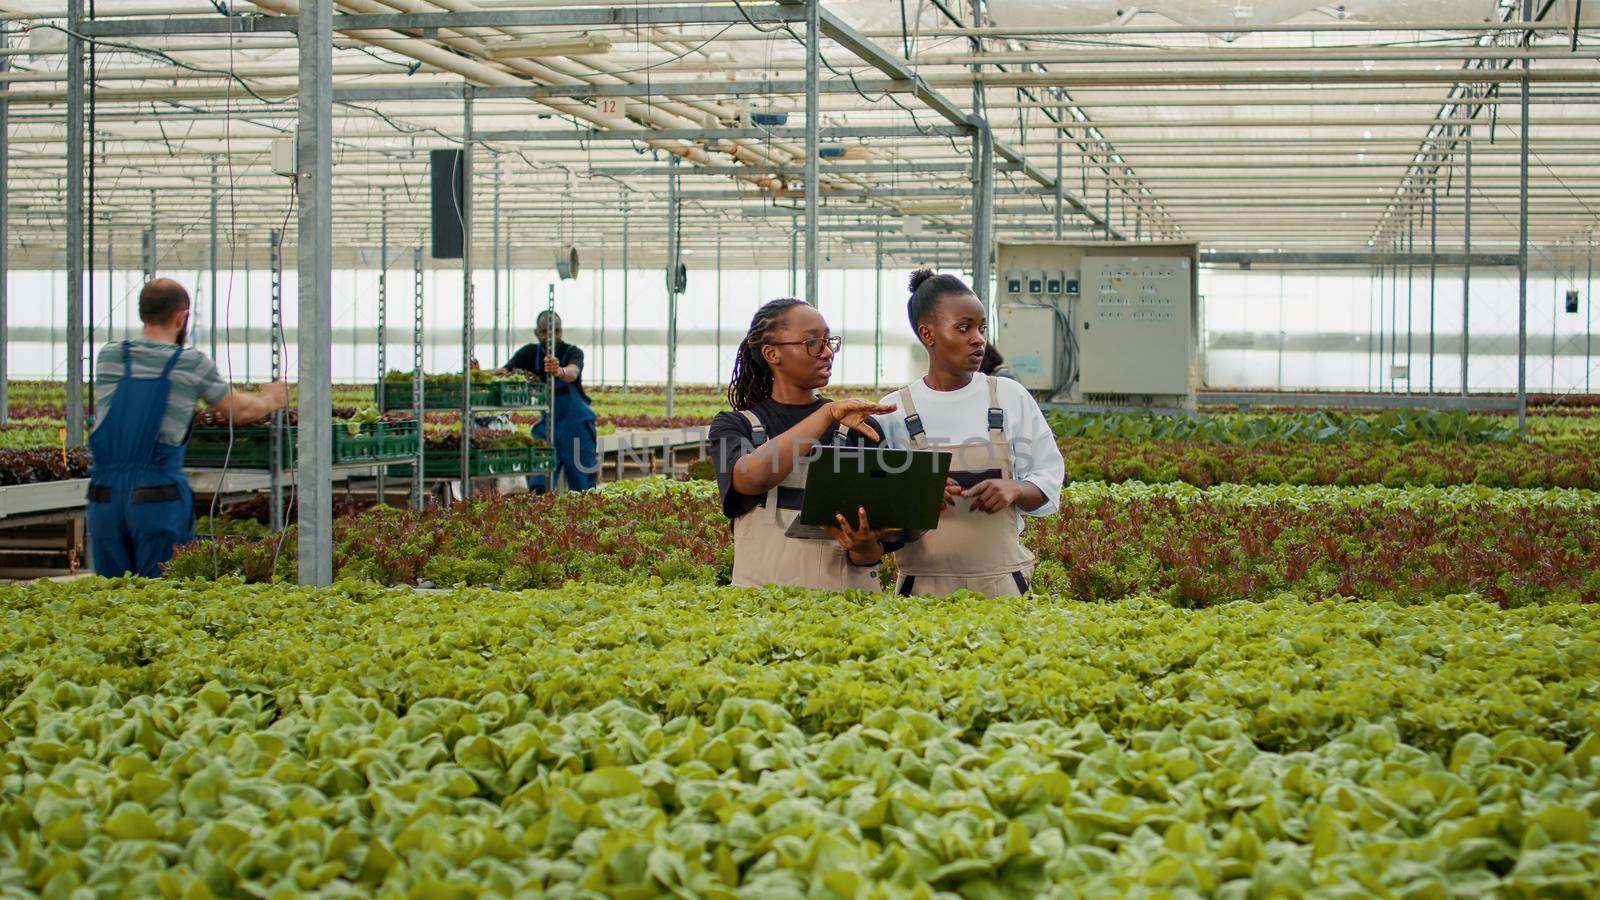 Two african american women holding laptop to manage online orders for harvested crops in greenhouse. Vegetables farm plant growers using portable computer talking about harvesting organic lettuce.